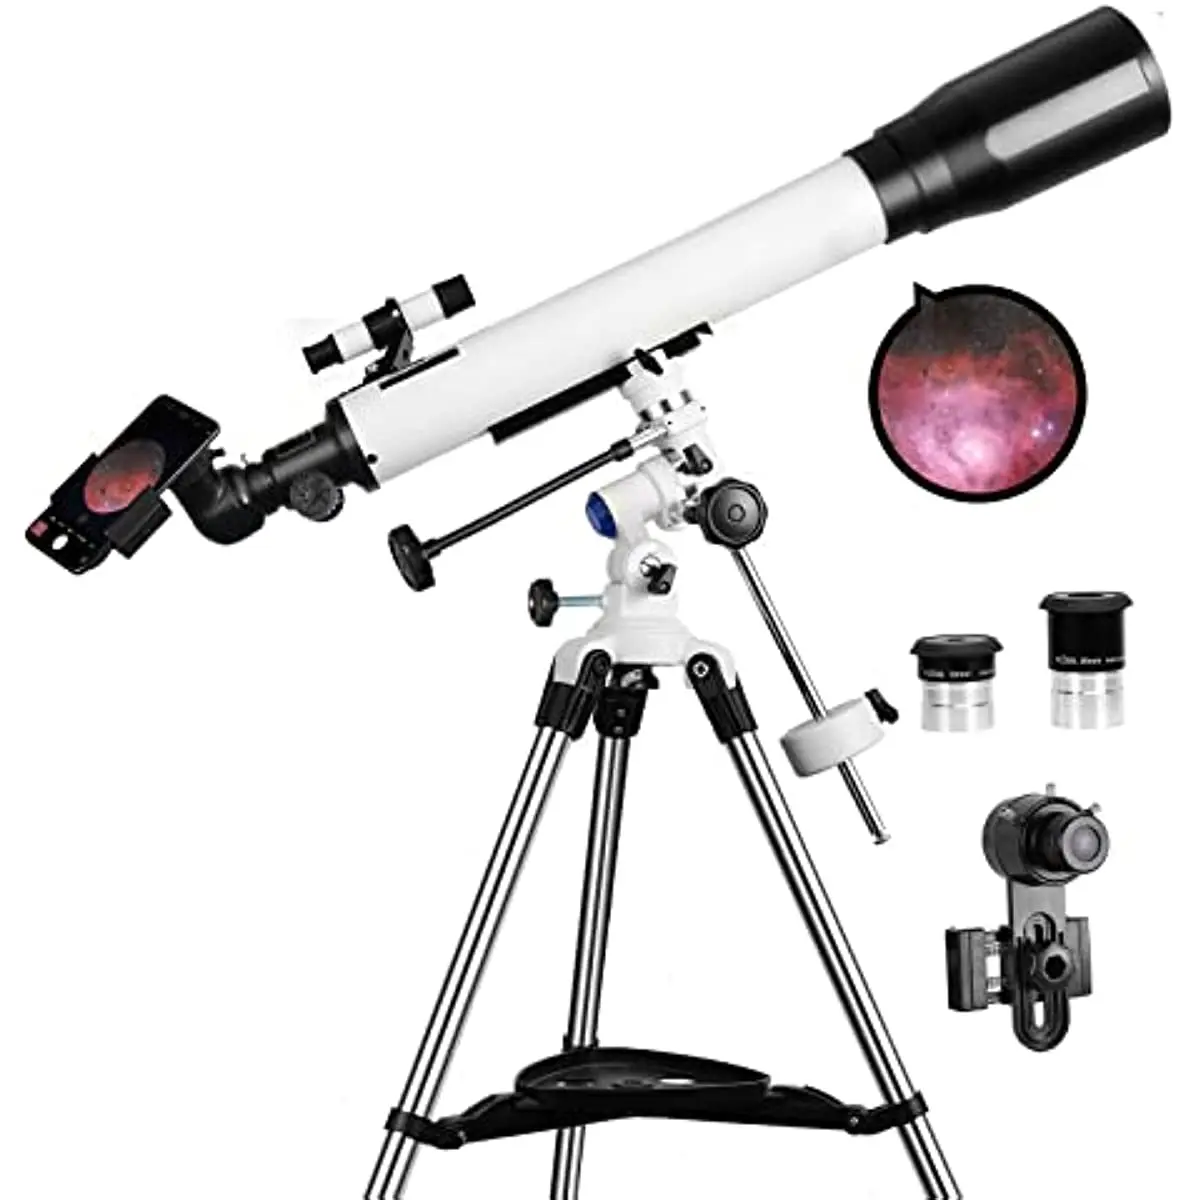 

Telescopes for Adults, 70mm Aperture and 700mm Focal Length Professional Astronomy Refractor Telescope for Kids and Beginners -